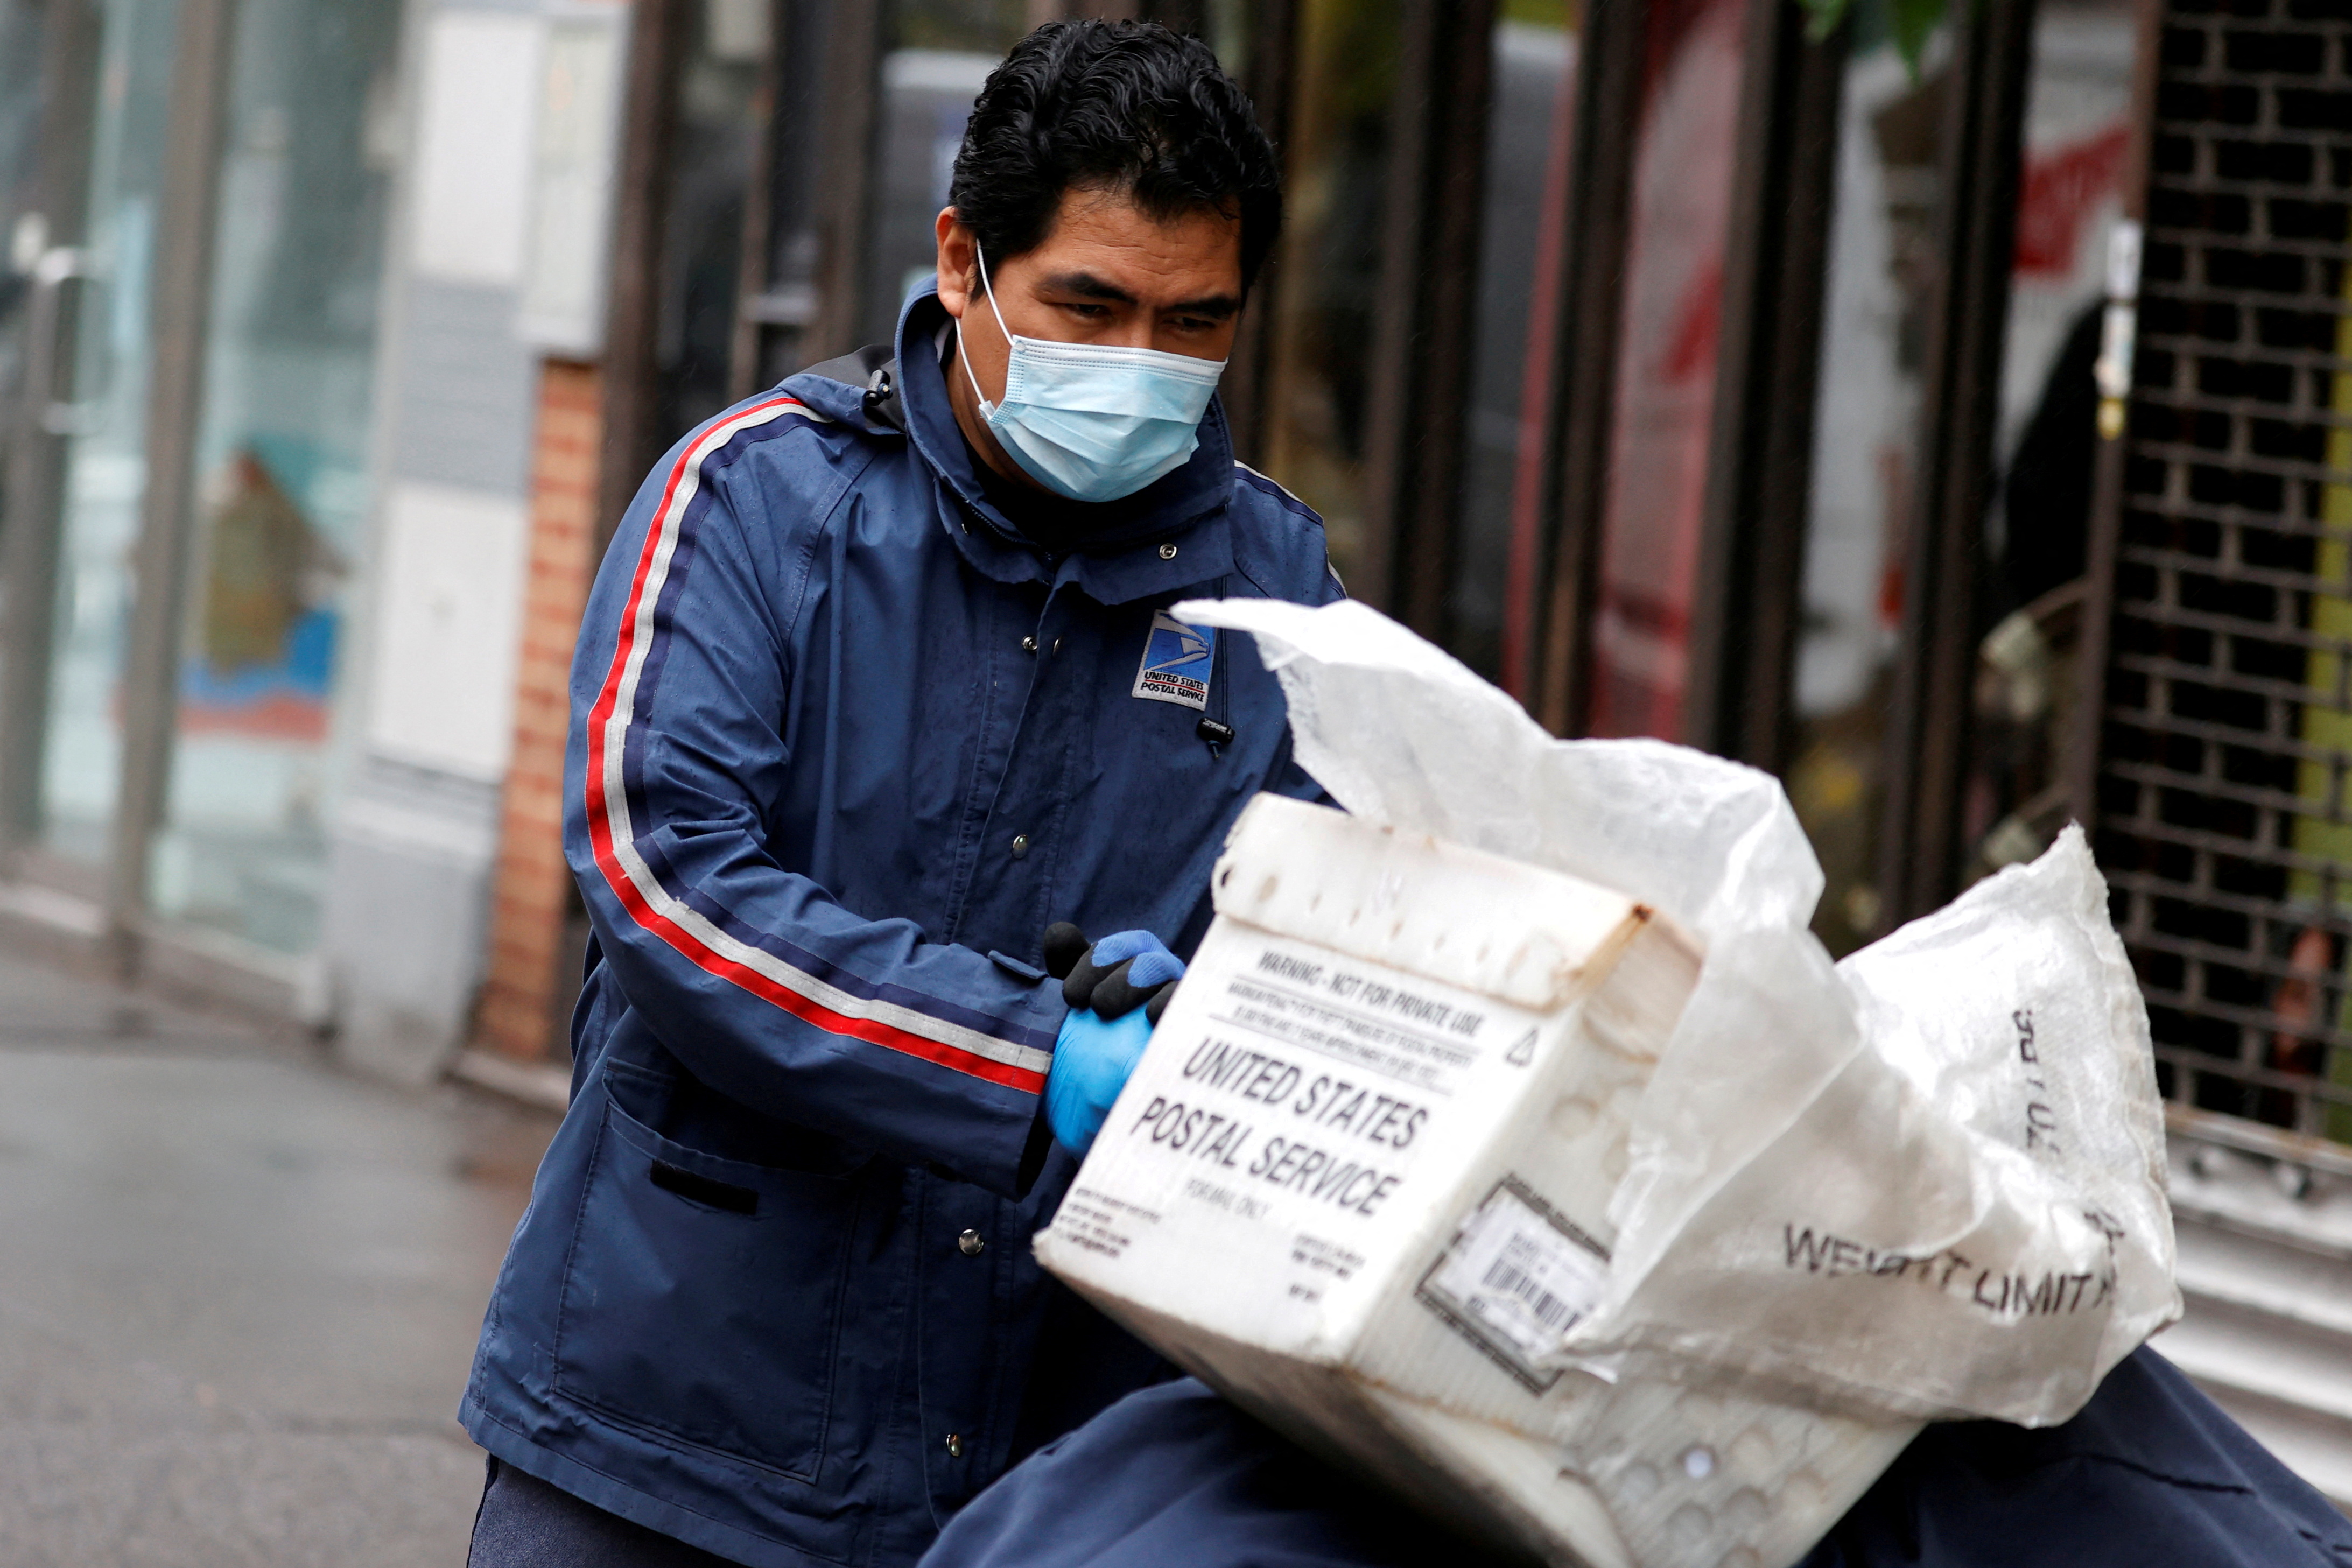 United States Postal Service (USPS) worker in Manhattan during outbreak of coronavirus disease (COVID-19) in New York